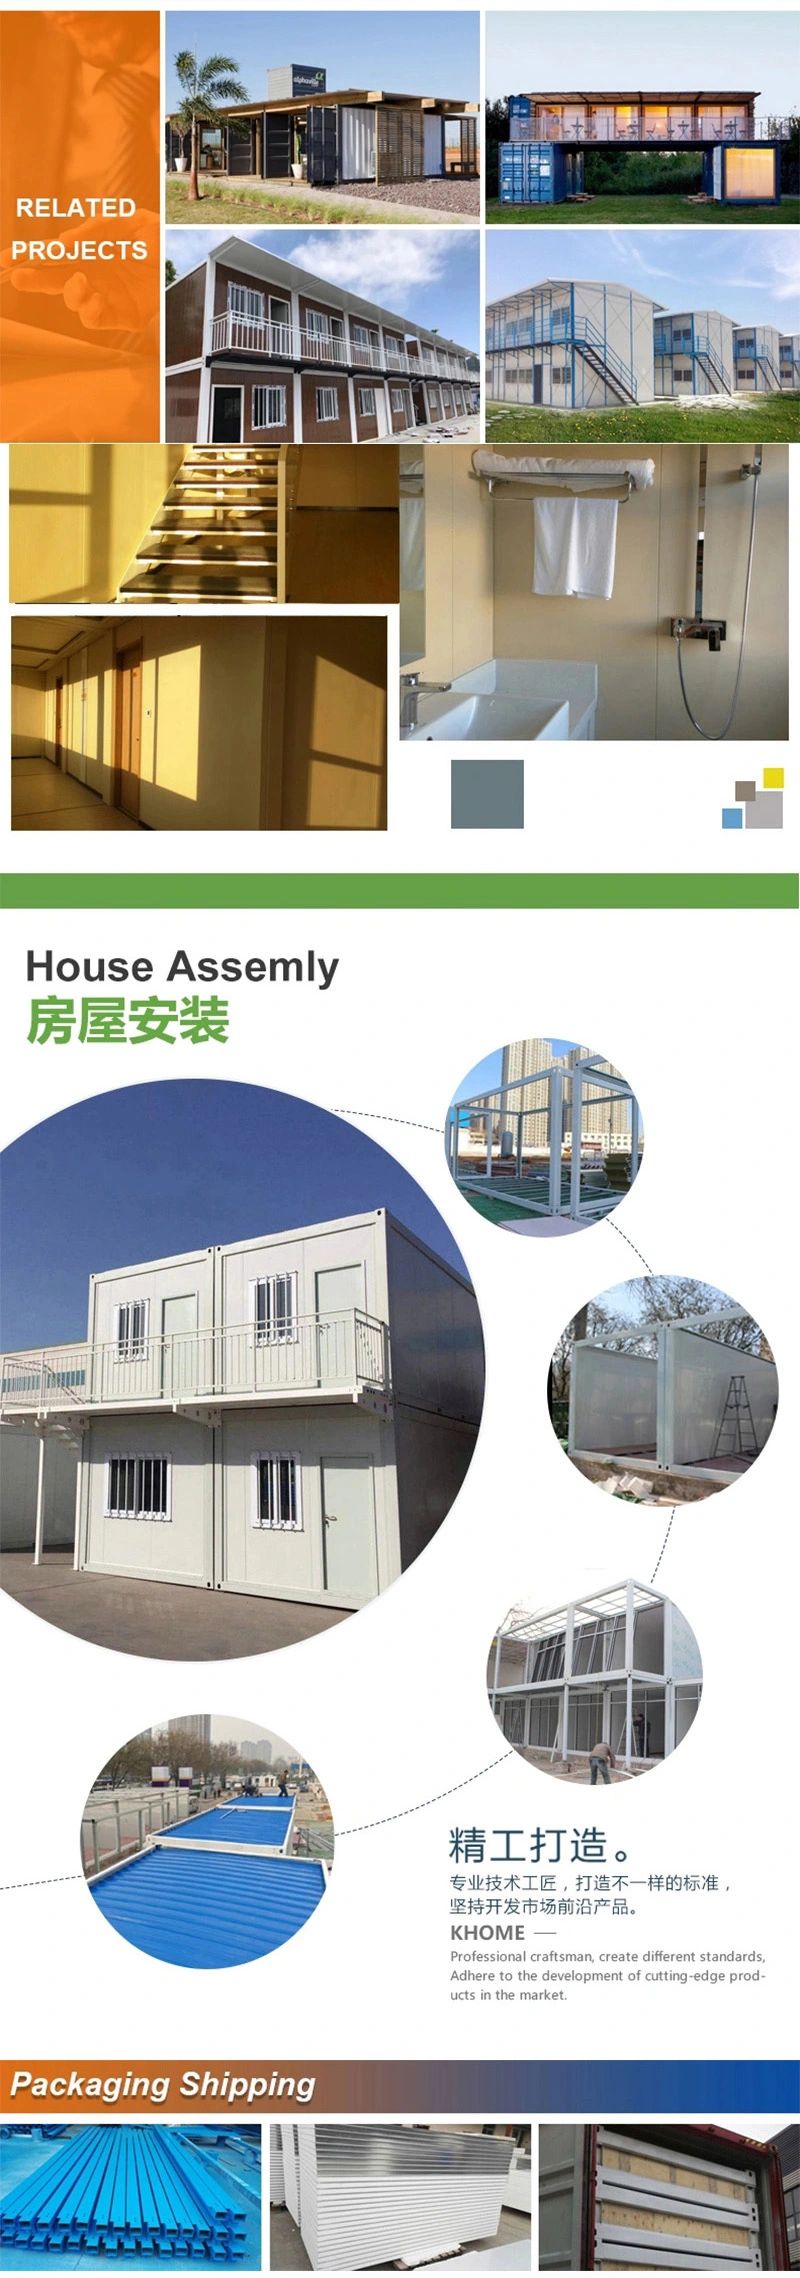 dormitory container house,used shipping container house,shipping container house used,dormitory house,shipping container container house